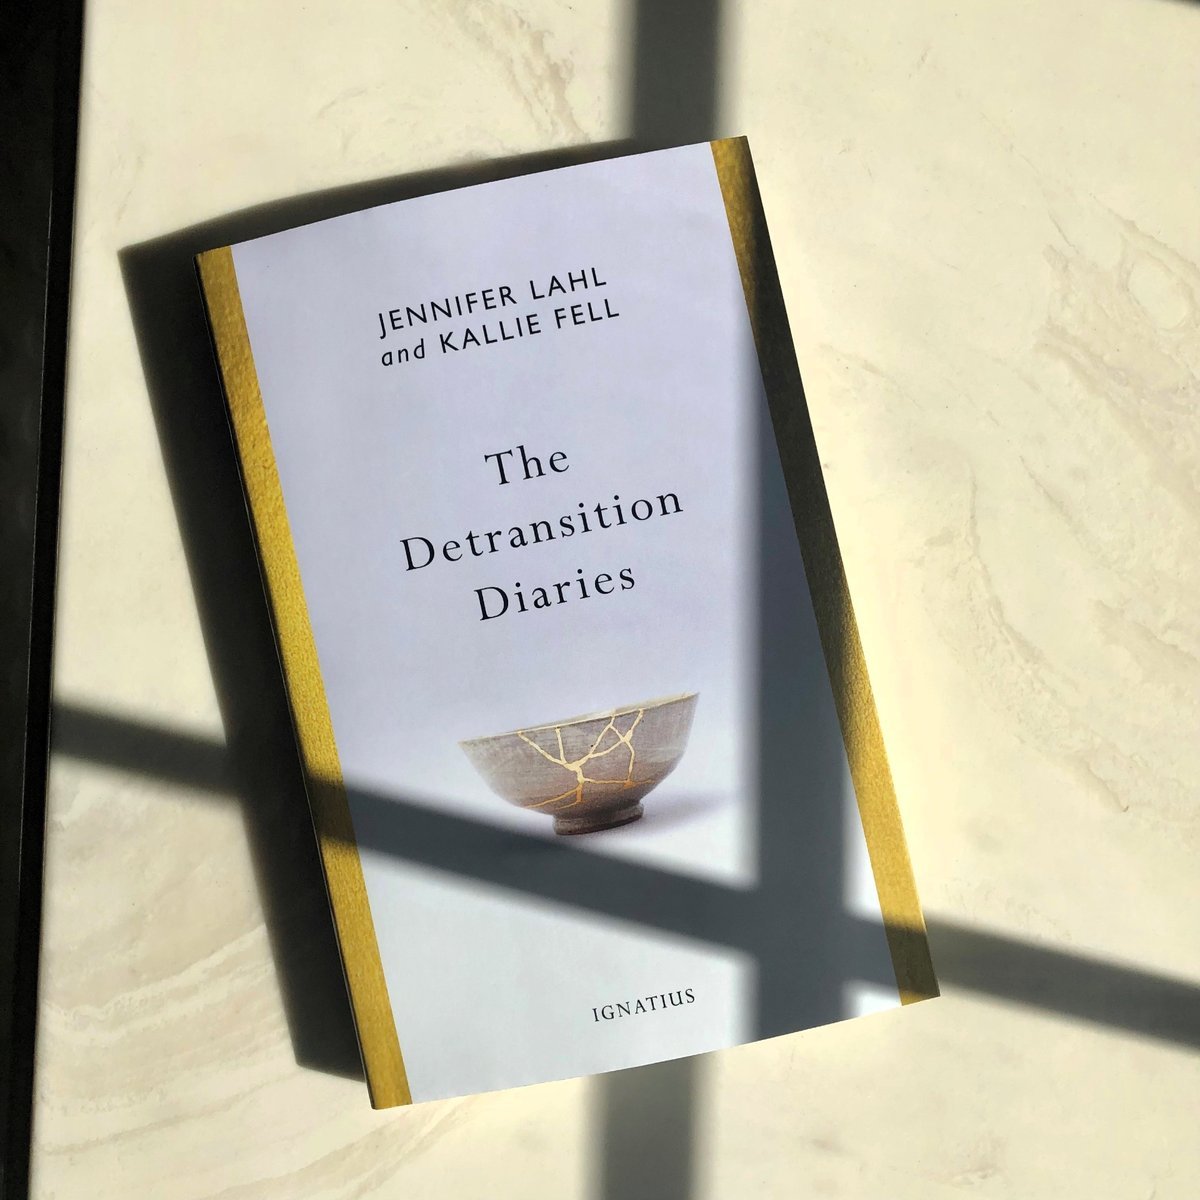 Important new book from @JenniferLahl and @kal_fell!

 'An indispensable exposé of one of the greatest medical scandals of all time—the ideological quackery known as 'gender affirming care'.'

— Jay Richards 

@IgnatiusPress 

ignatius.com/the-detransiti…